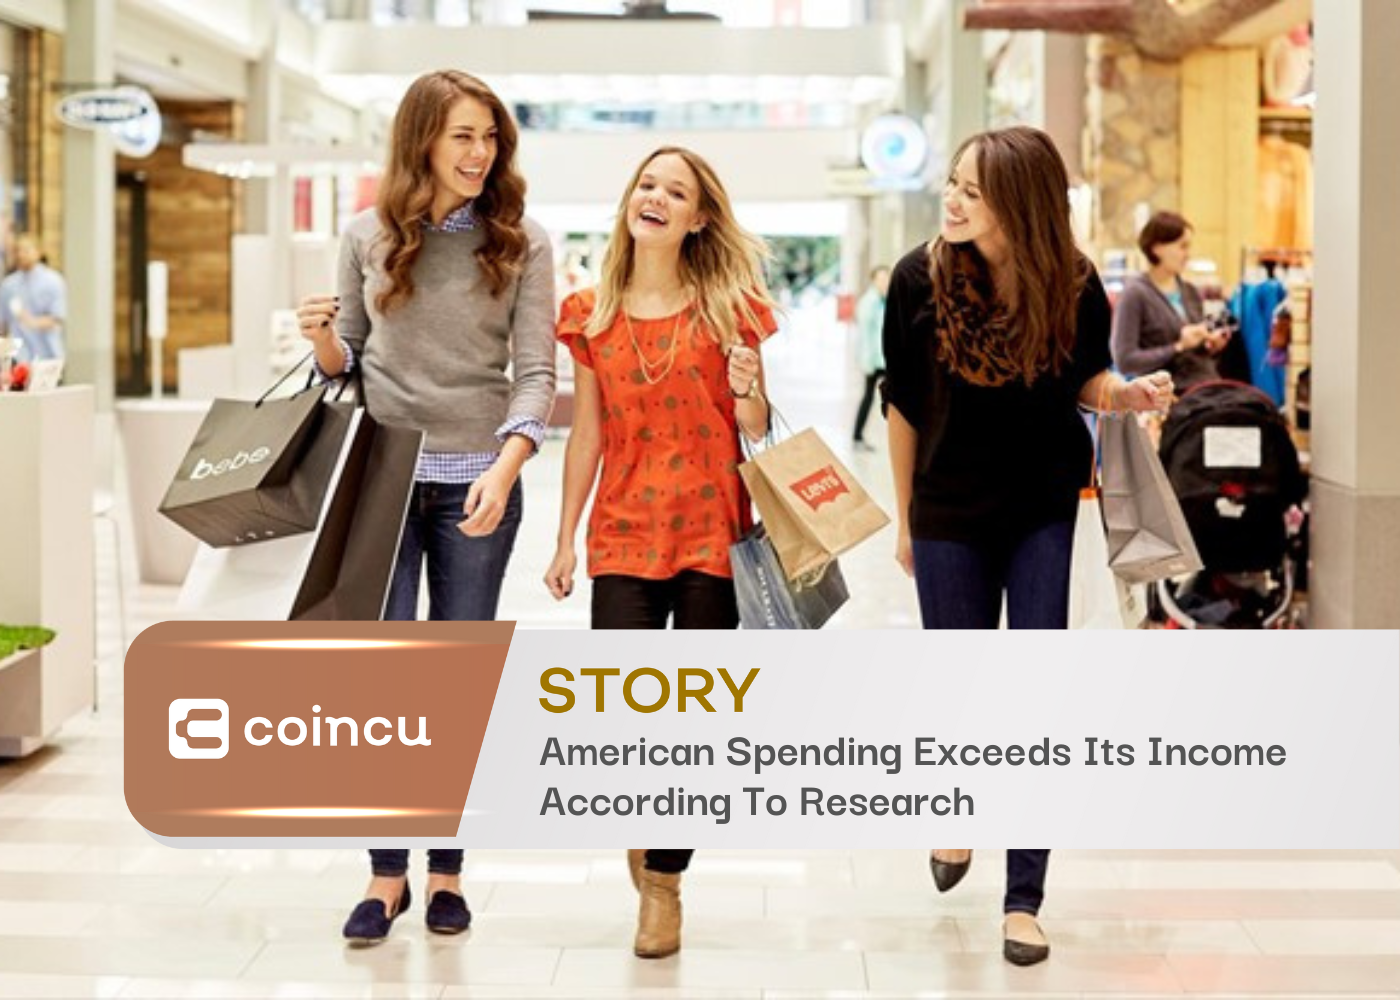 American Spending Exceeds Its Income